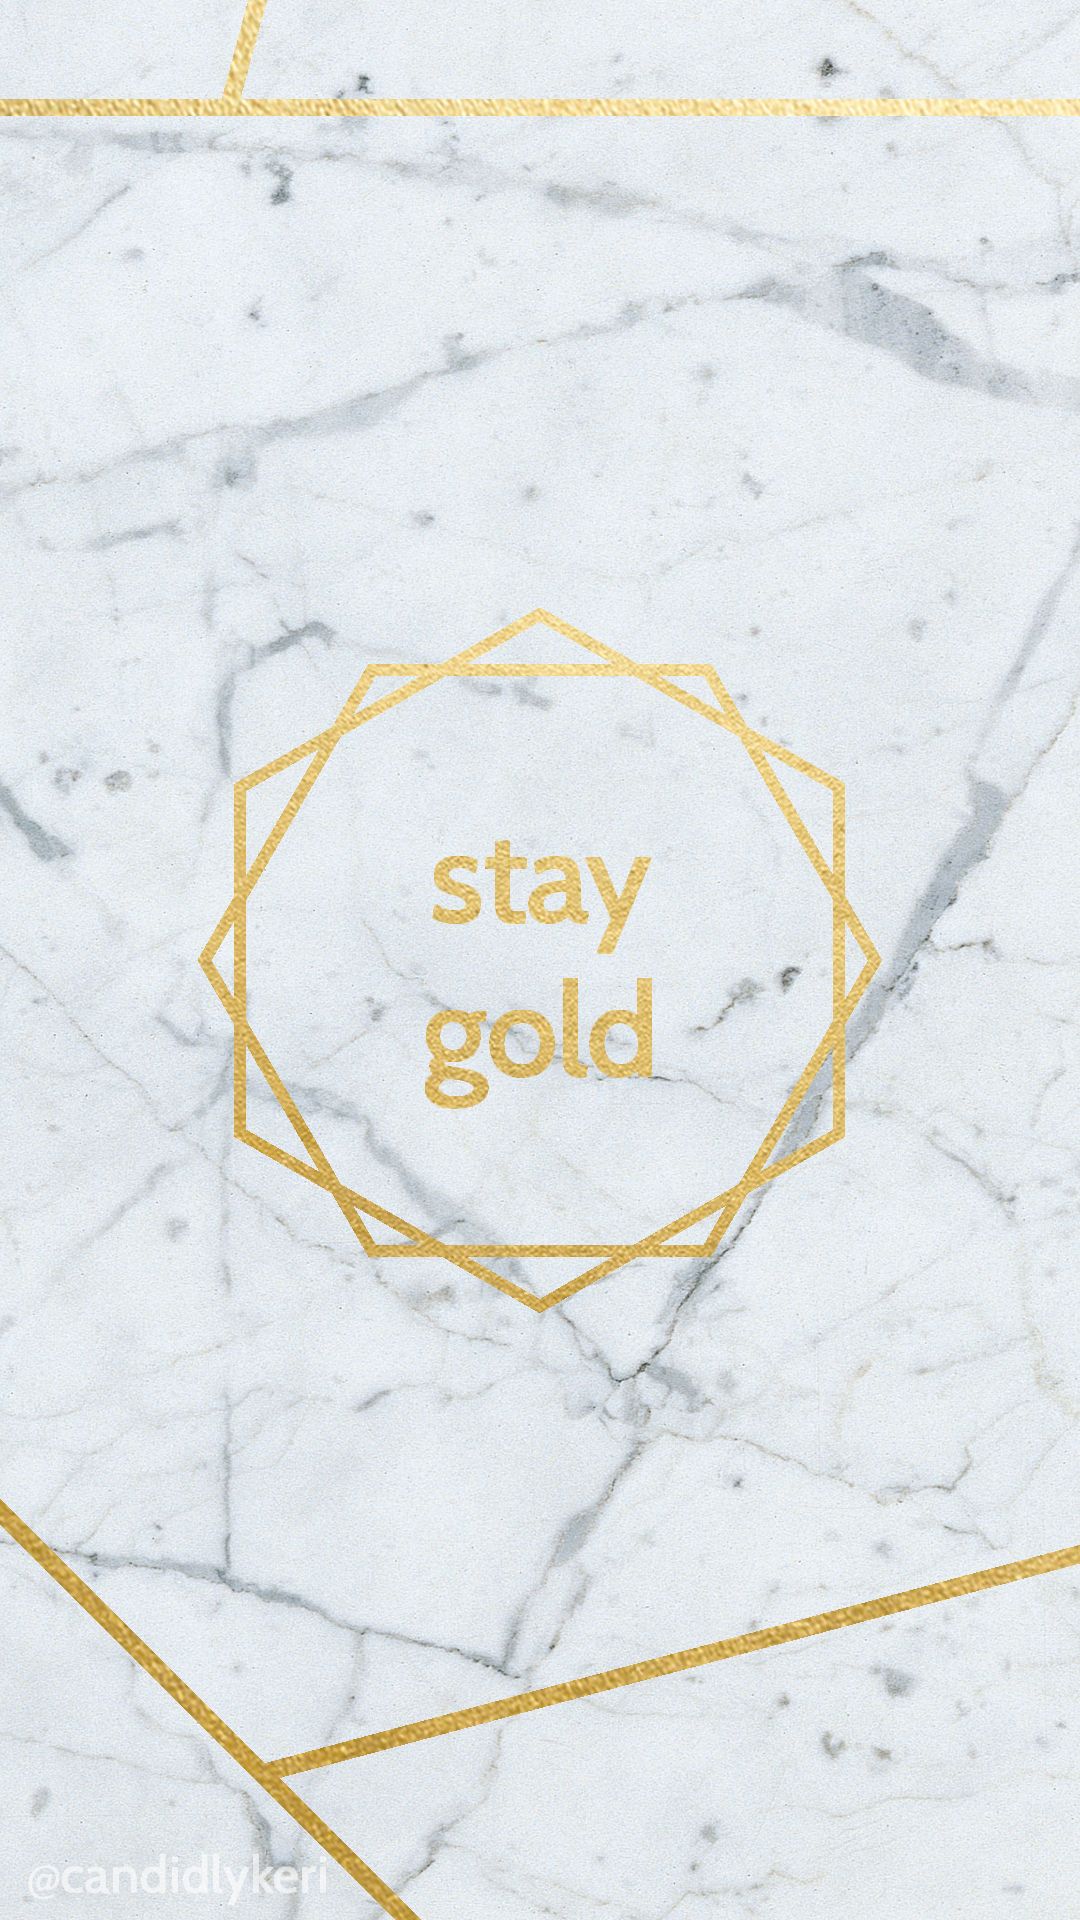 Stay gold, gold and granite quote for wallpaper on desktop, iphone ...